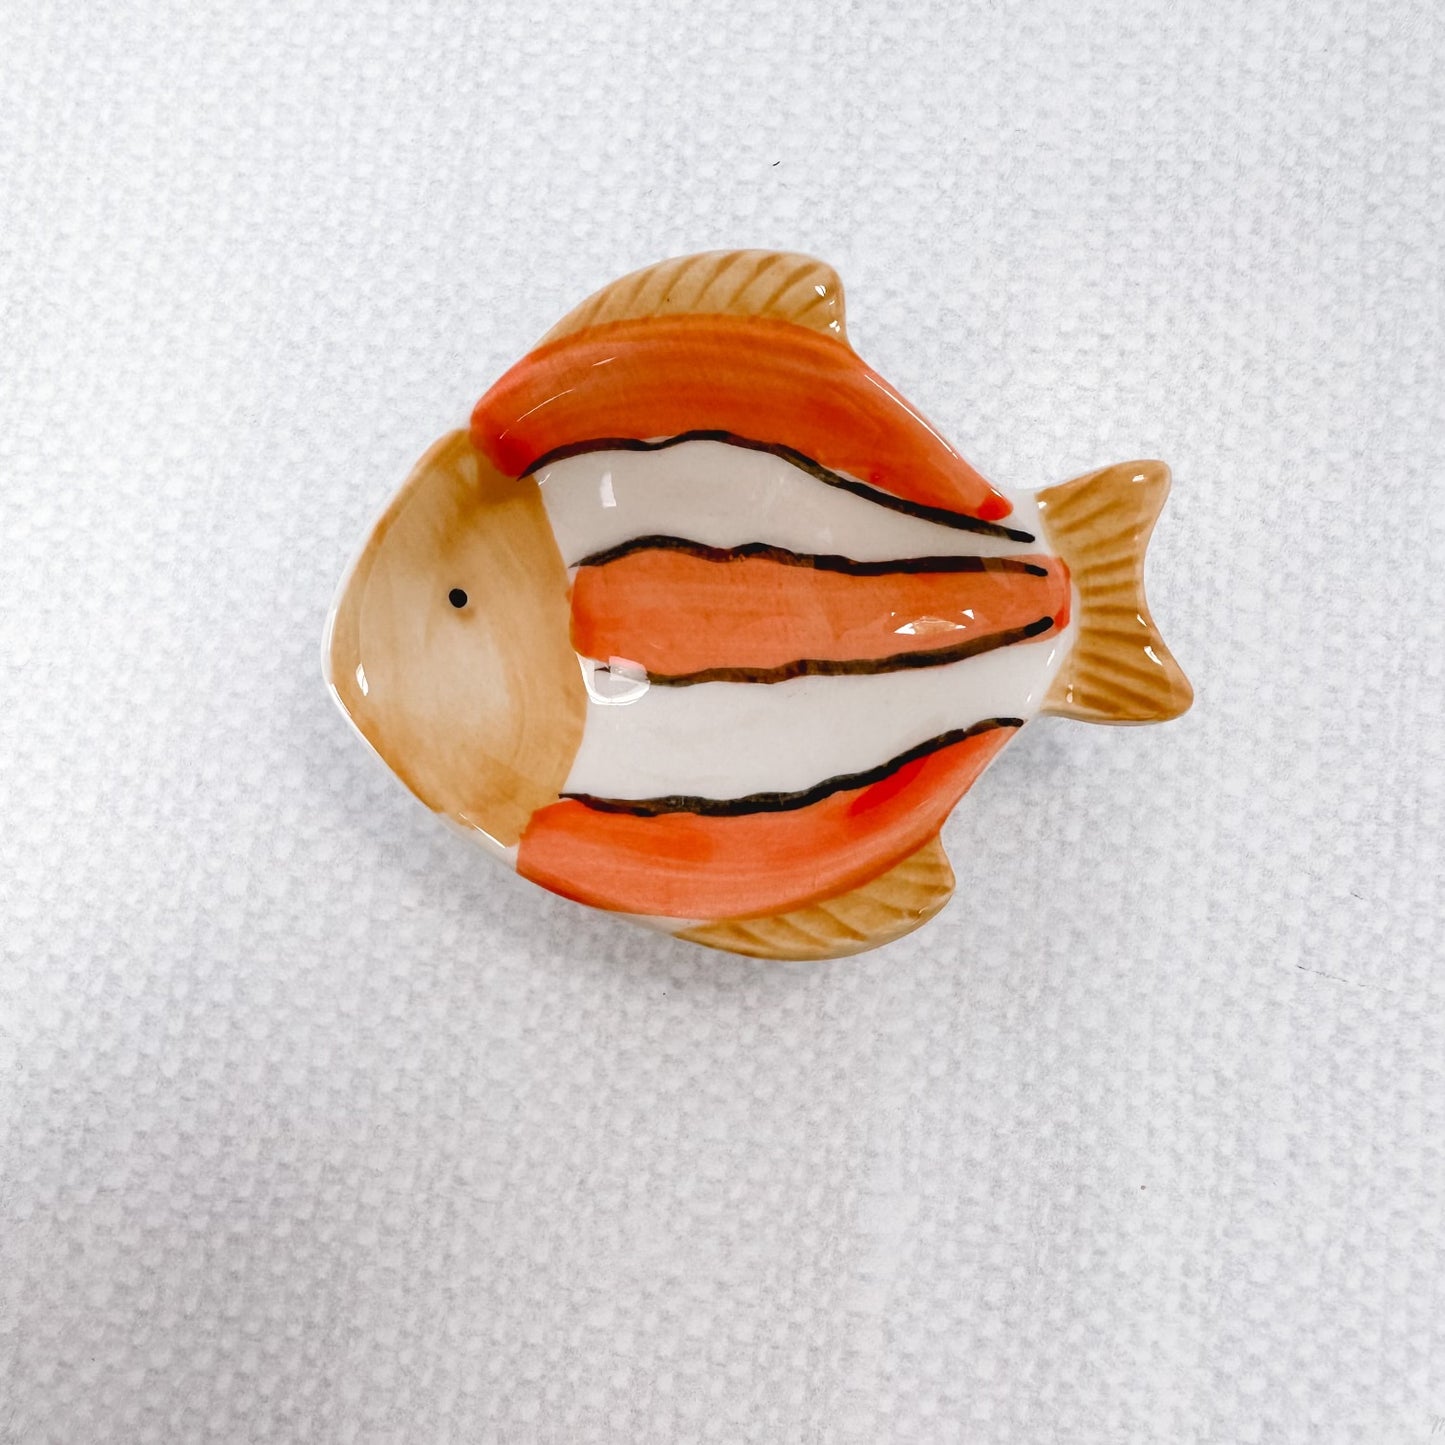 orange and white striped fish with light brown fins.